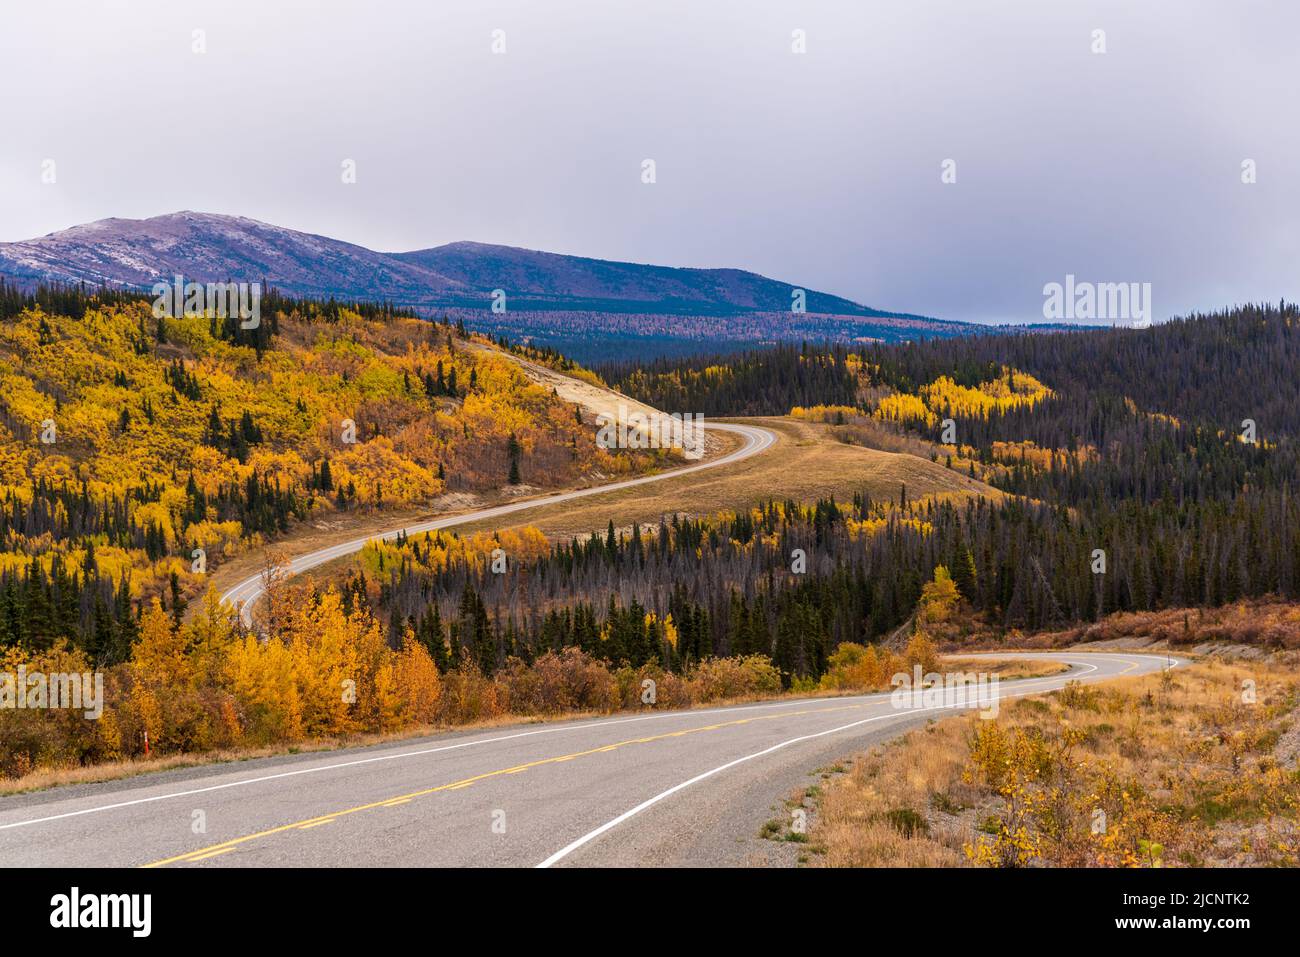 Amazing view of a road highway with fall scenes and yellow autumn colors. Yukon Territory, Alaska border in Canada. Stock Photo